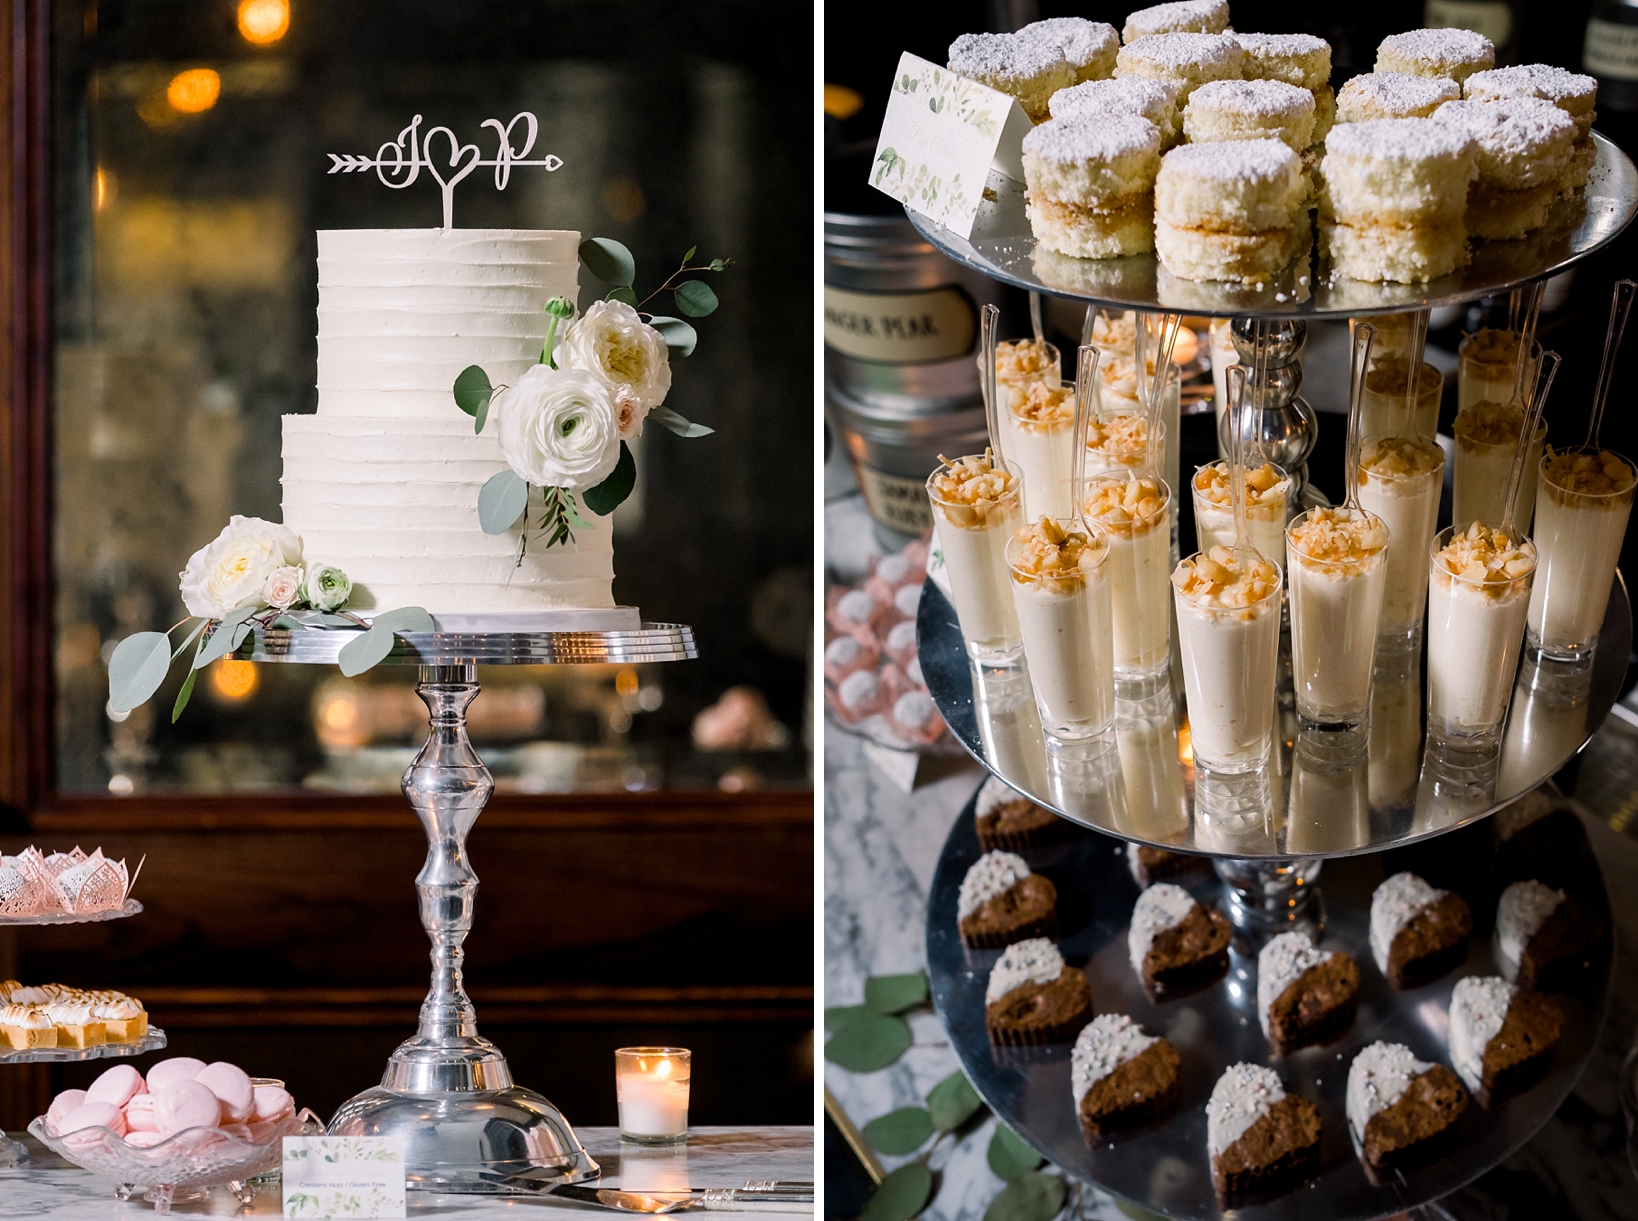 Wedding cake with assorted sweet treats for the guests to eat during this oxford exchange wedding day